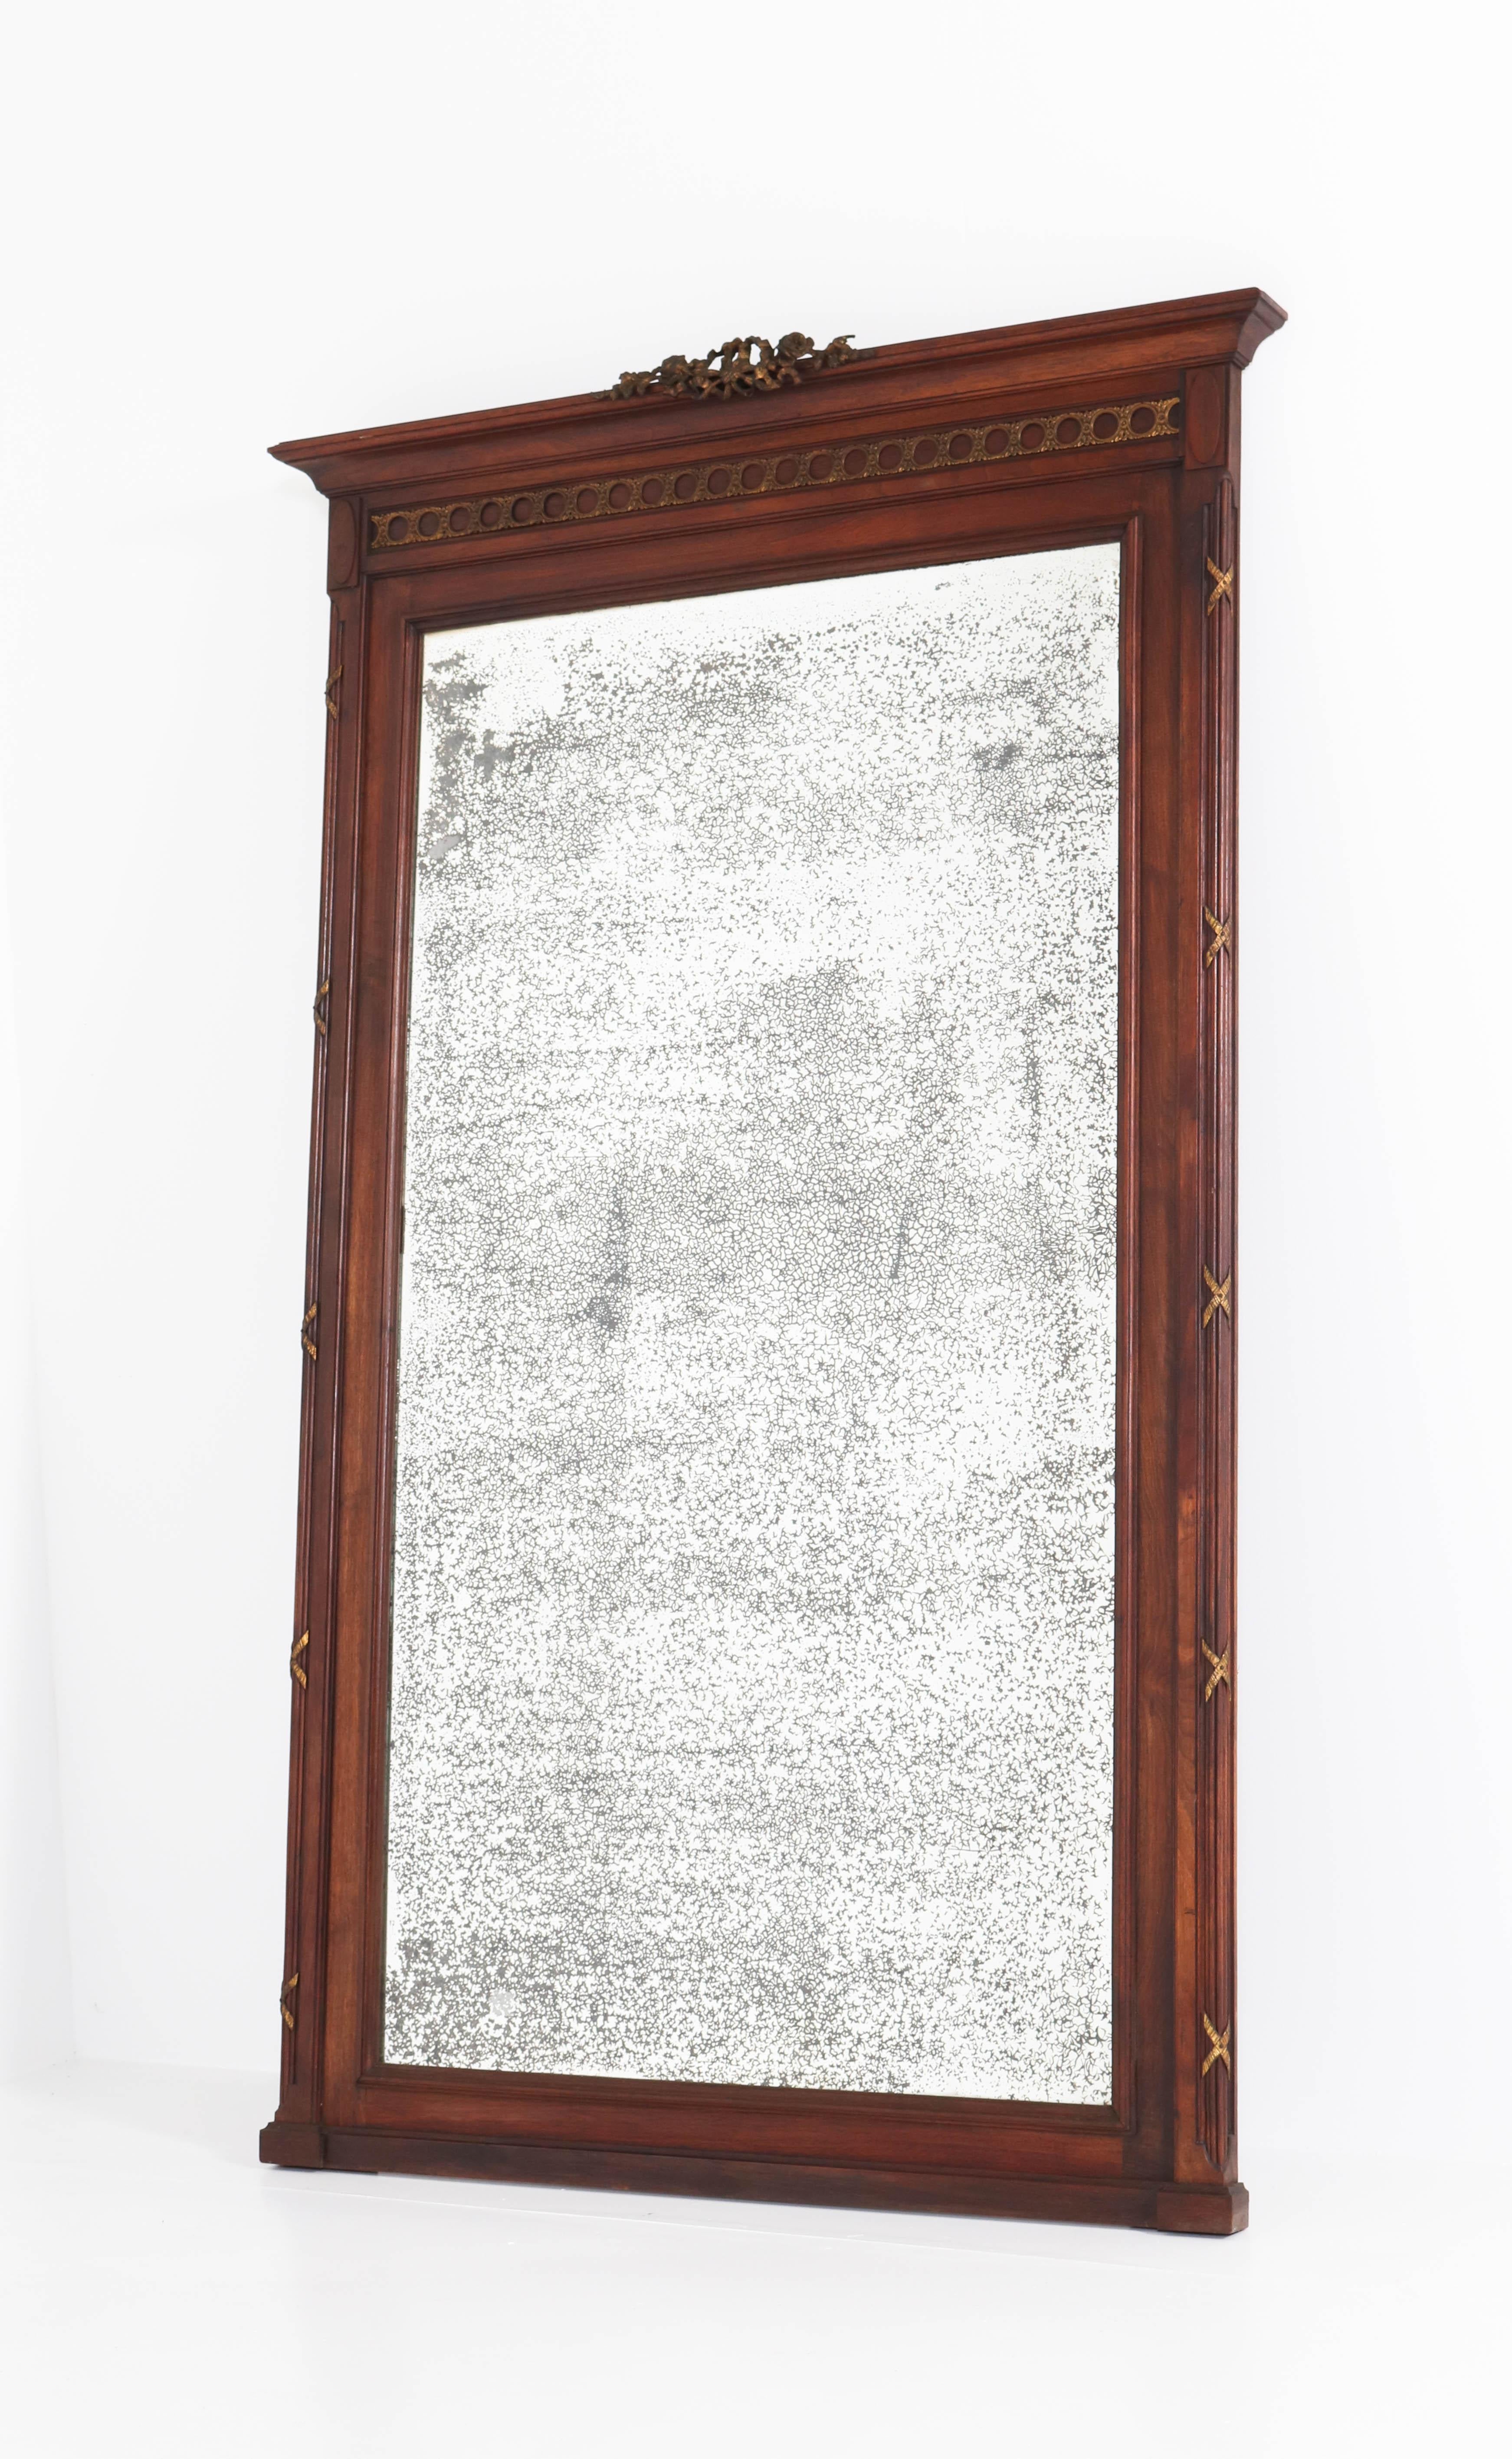 French Mahogany and Bronze Louis XV Style Mirror with Distressed Glass, 1900s (Louis XV.)